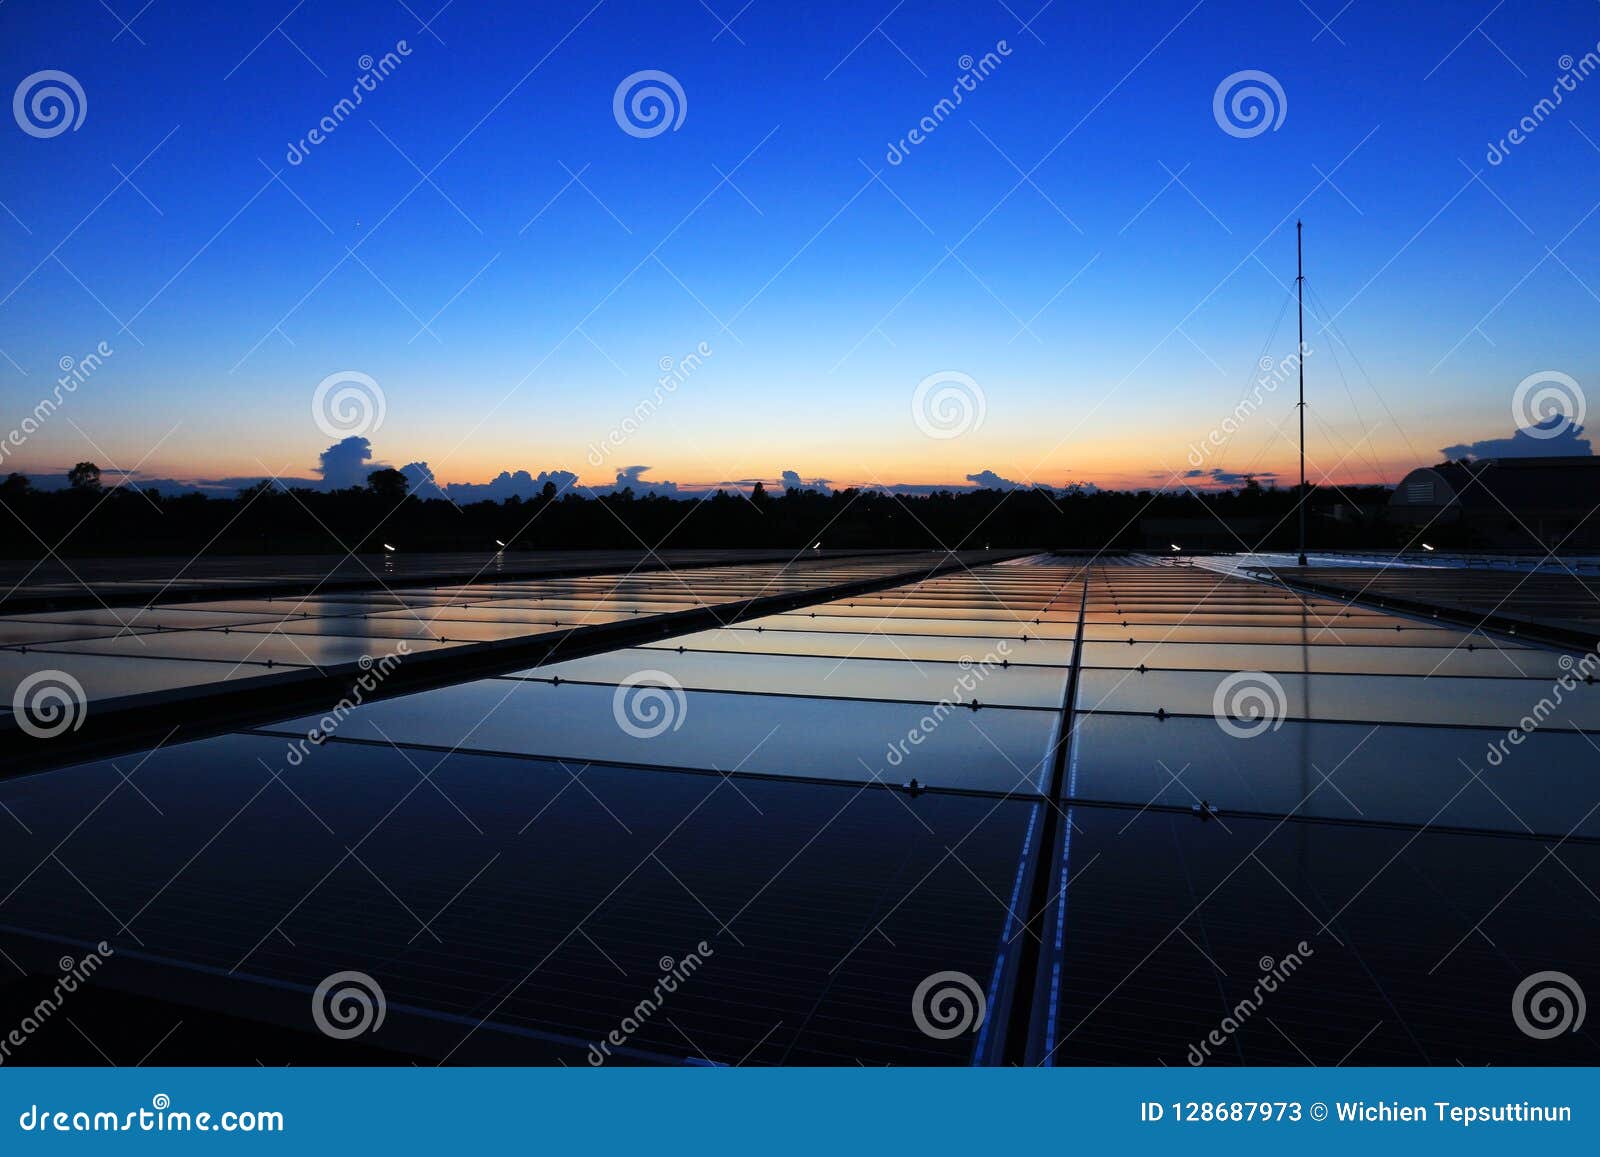 solar pv rooftop beautiful clear and dawn sky